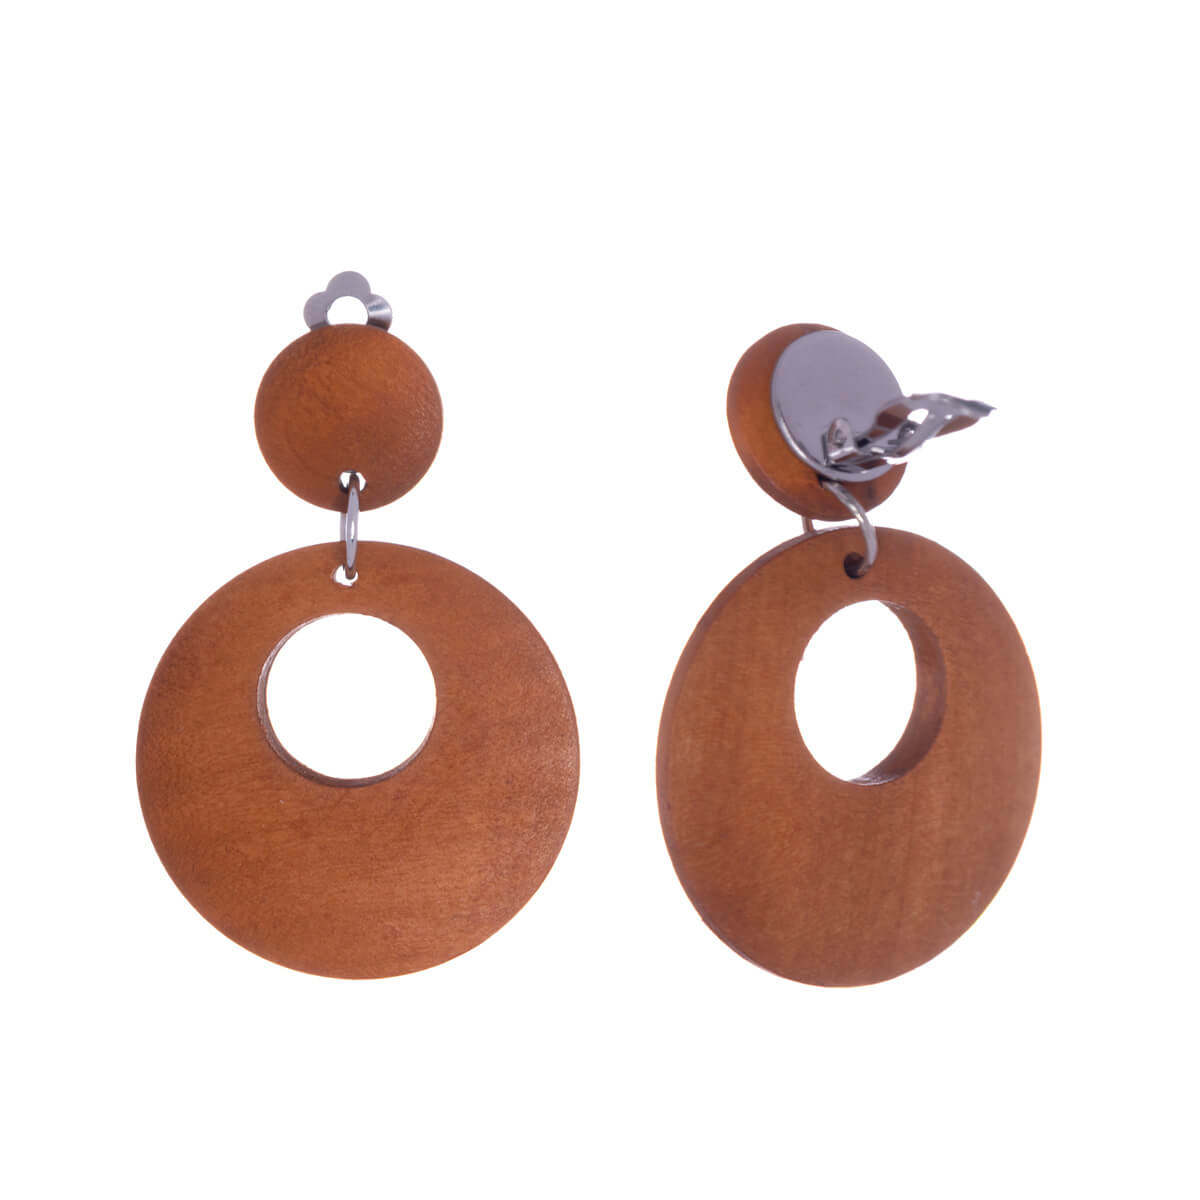 Round wooden clip earrings - Made in Finland (steel 316L)